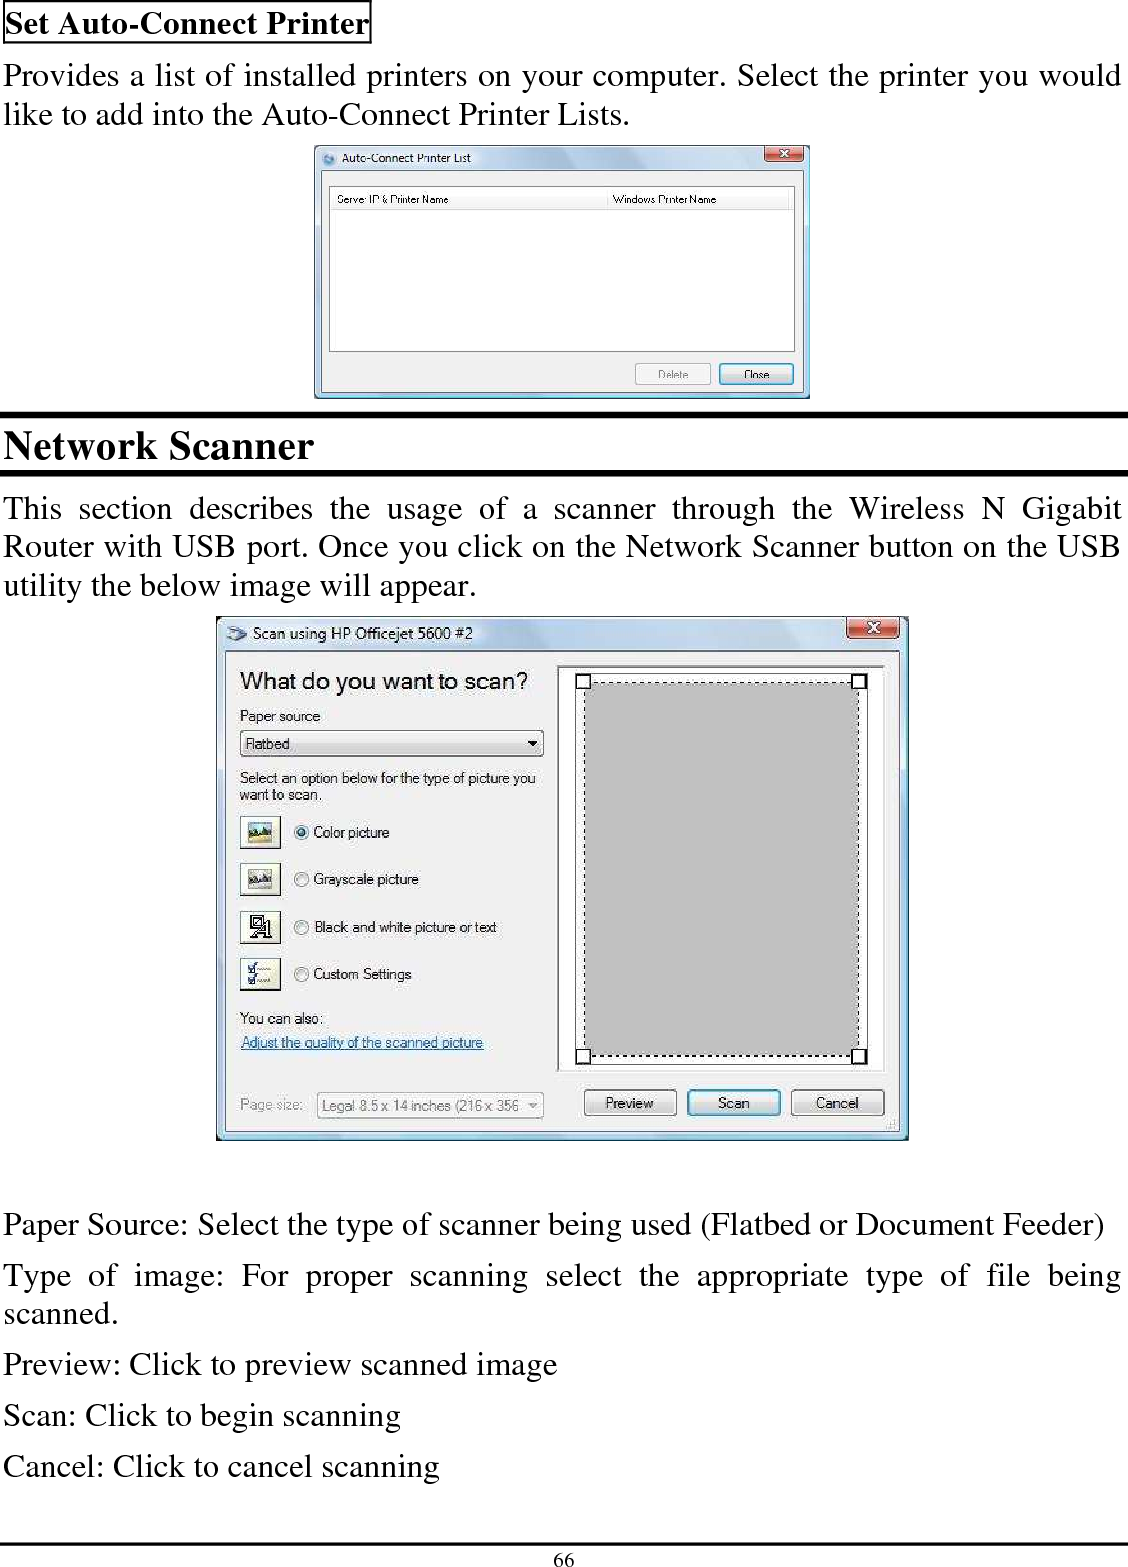 66 Set Auto-Connect Printer Provides a list of installed printers on your computer. Select the printer you would like to add into the Auto-Connect Printer Lists.   Network Scanner This  section  describes  the  usage  of  a  scanner  through  the  Wireless  N  Gigabit Router with USB port. Once you click on the Network Scanner button on the USB utility the below image will appear.   Paper Source: Select the type of scanner being used (Flatbed or Document Feeder) Type  of  image:  For  proper  scanning  select  the  appropriate  type  of  file  being scanned.  Preview: Click to preview scanned image Scan: Click to begin scanning  Cancel: Click to cancel scanning 